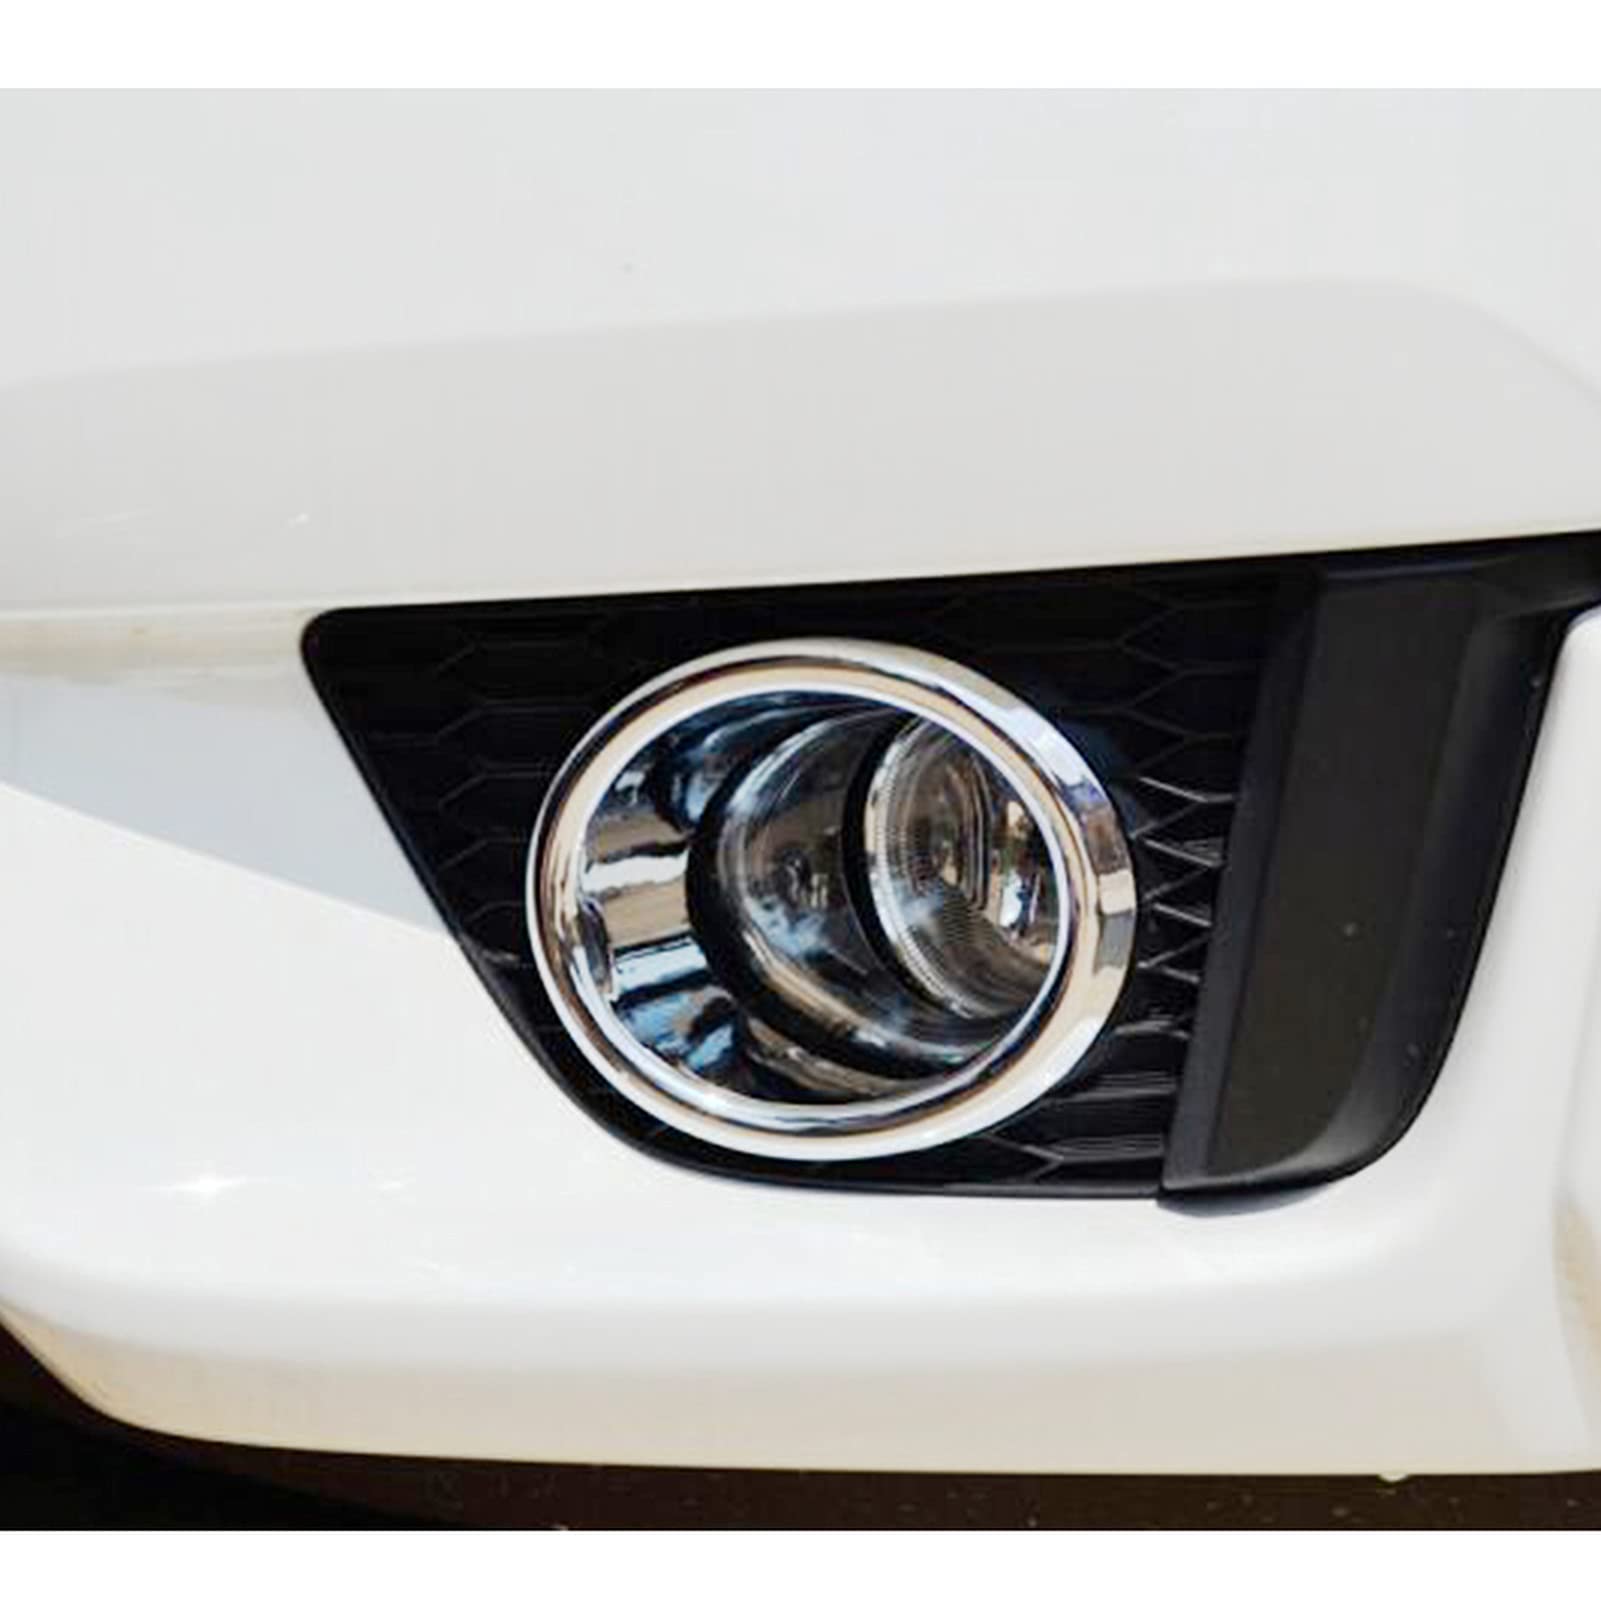 Materials for car fog lamp covers